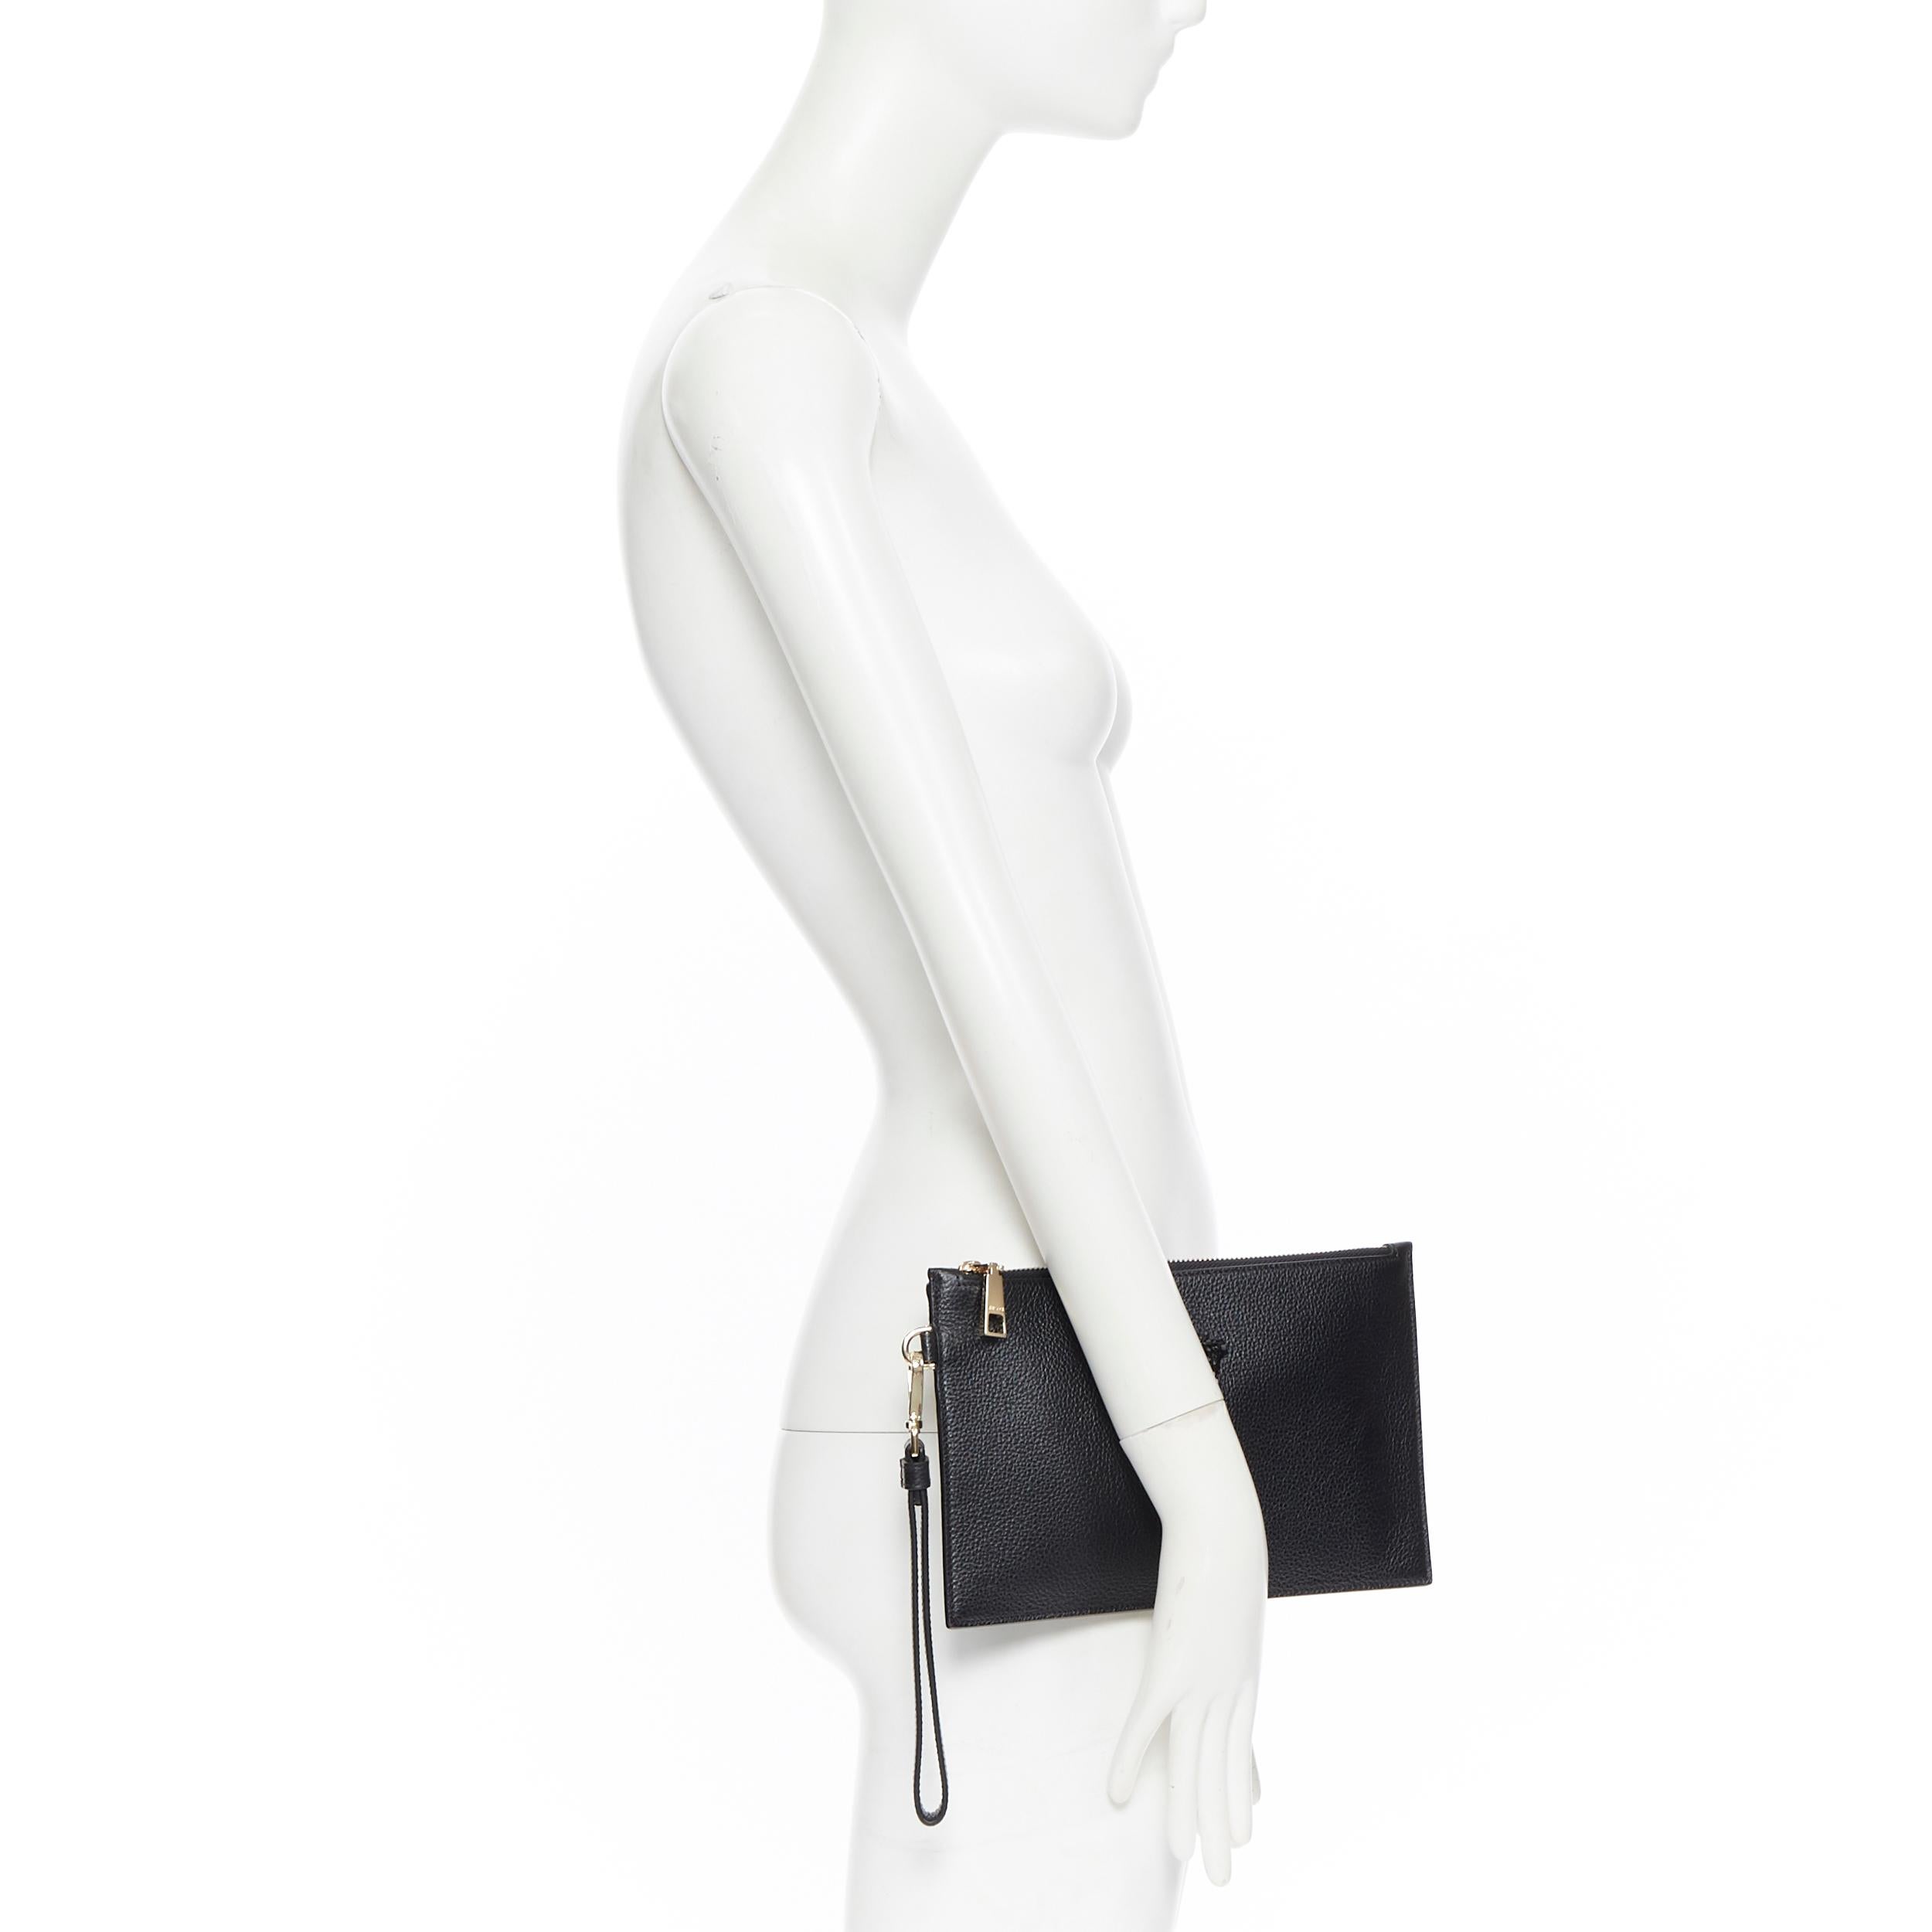 new VERSACE Palazzo Medusa black pebble leather top zip wristlet clutch bag
Brand: Versace
Designer: Donatella Versace
Model Name / Style: Palazzo Medusa
Material: Leather
Color: Black
Pattern: Solid
Closure: Zip
Extra Detail:
Made in: